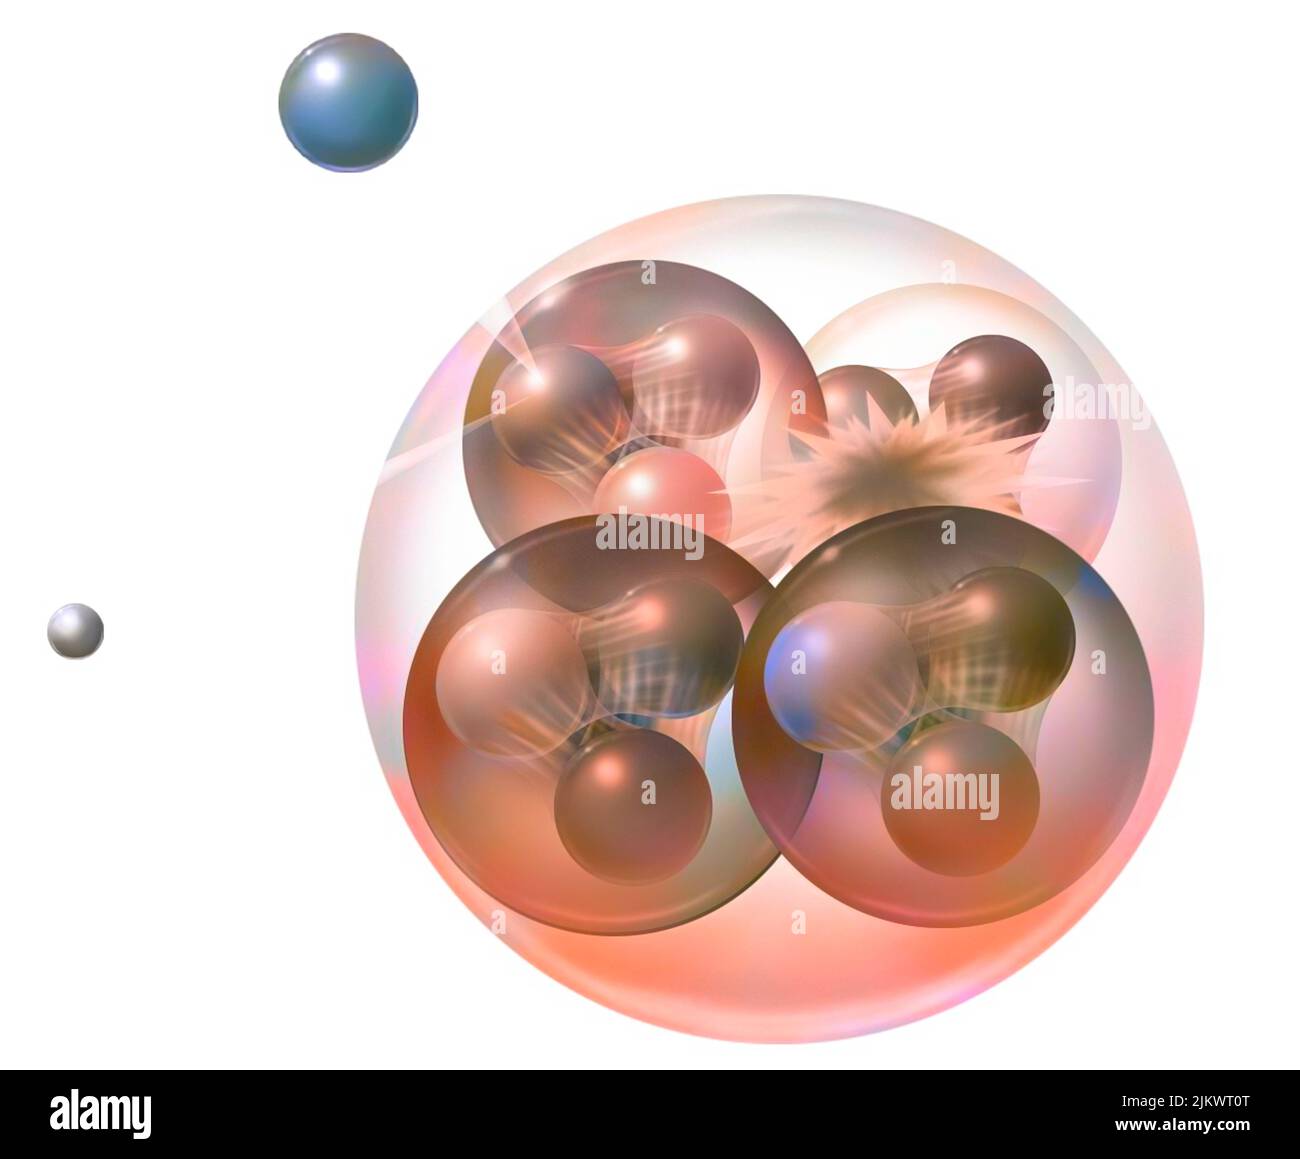 Quantum physics: nucleus made up of 2 neutrons and 2 protons. Stock Photo